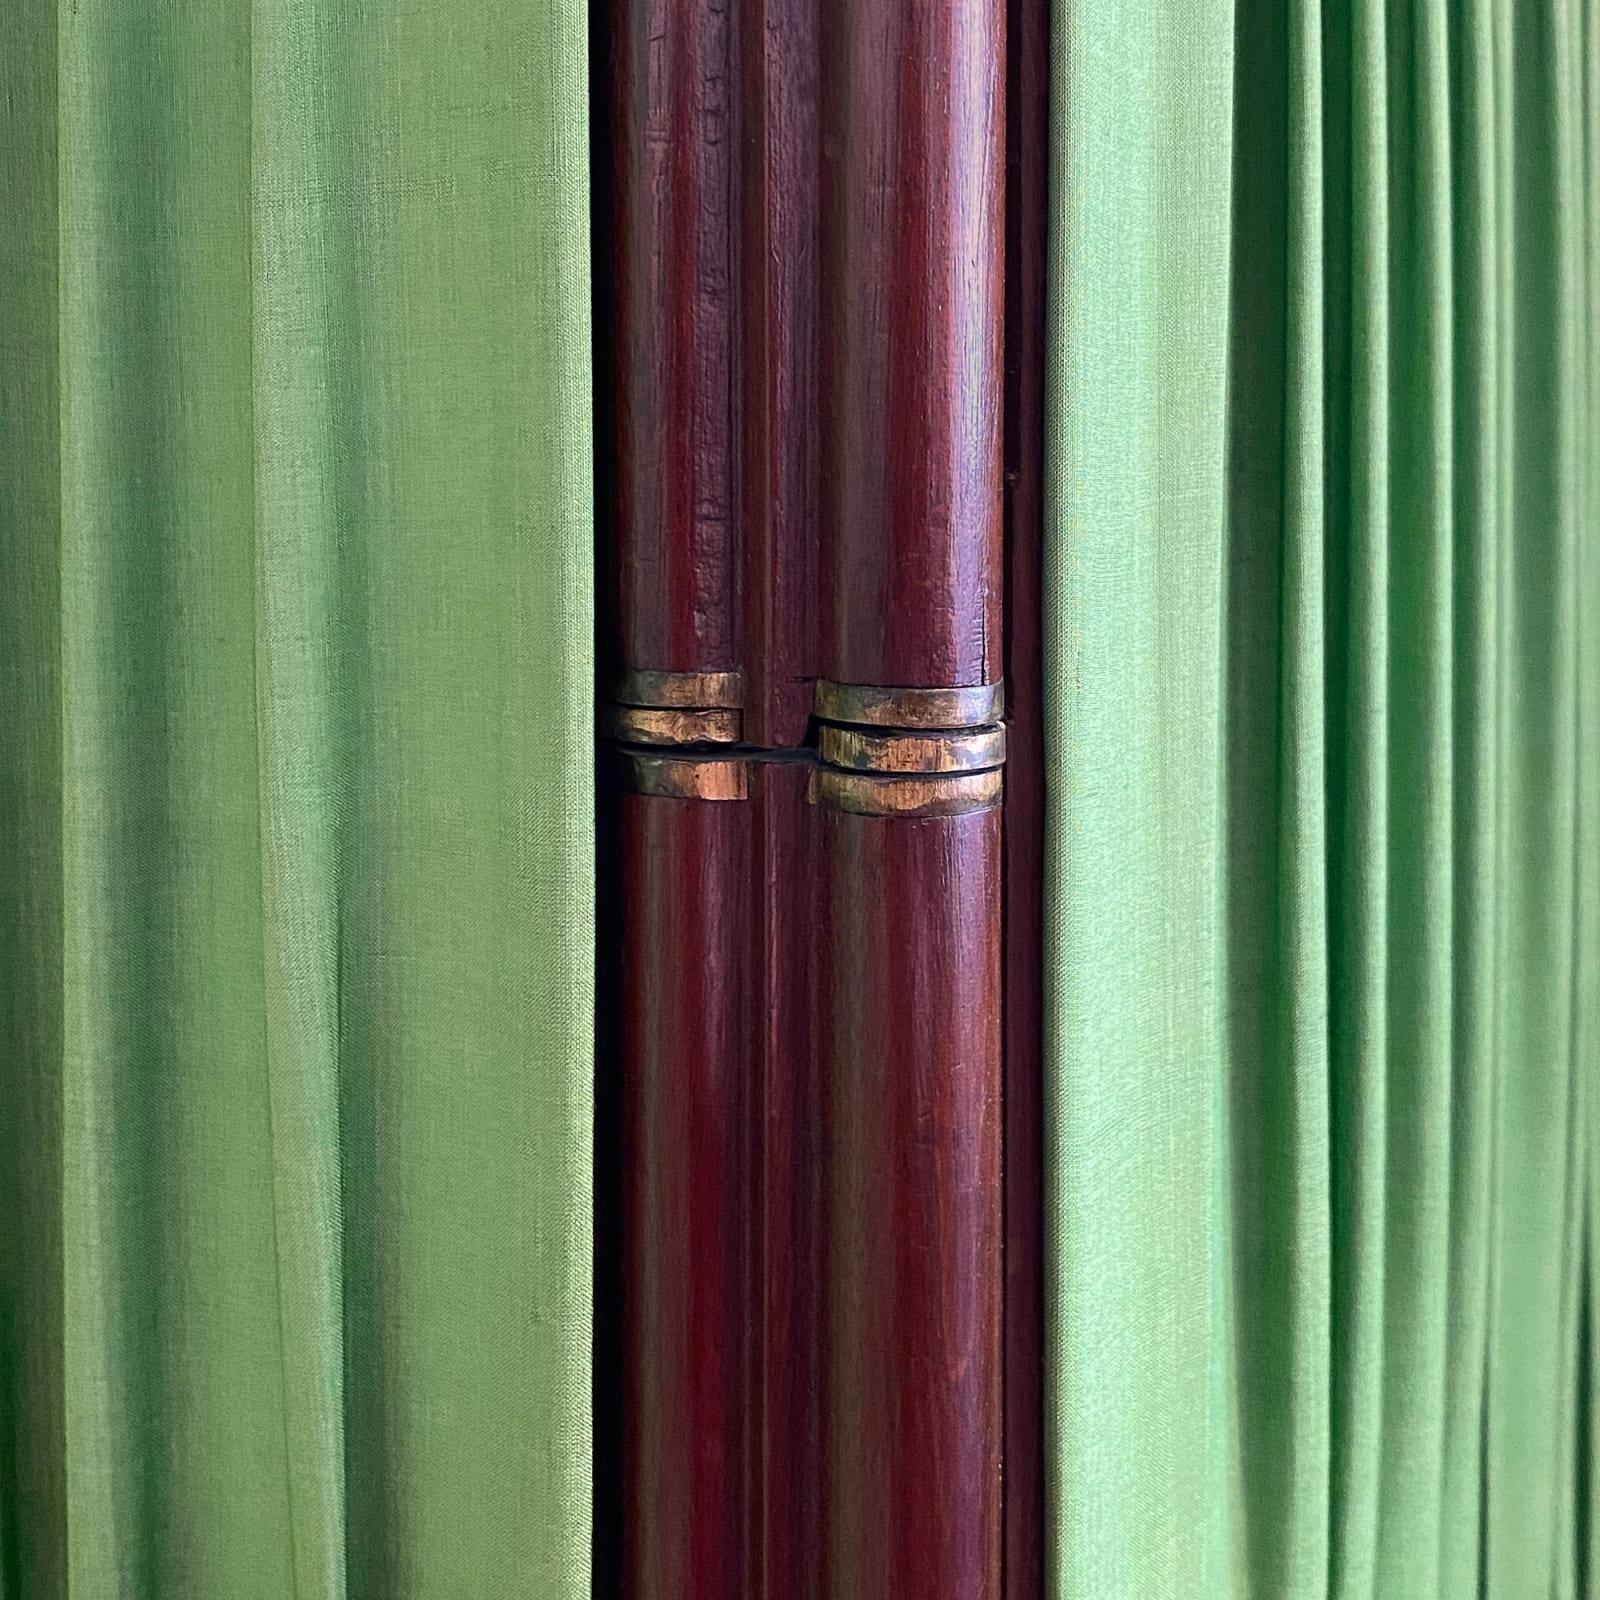 Five fold screen with original apple green pleated silk and braid.
Mahogany frame.
French c.1810
Measures: height 118cm Each panel 45 cm wide
In original condition, showing perfect wear and use.